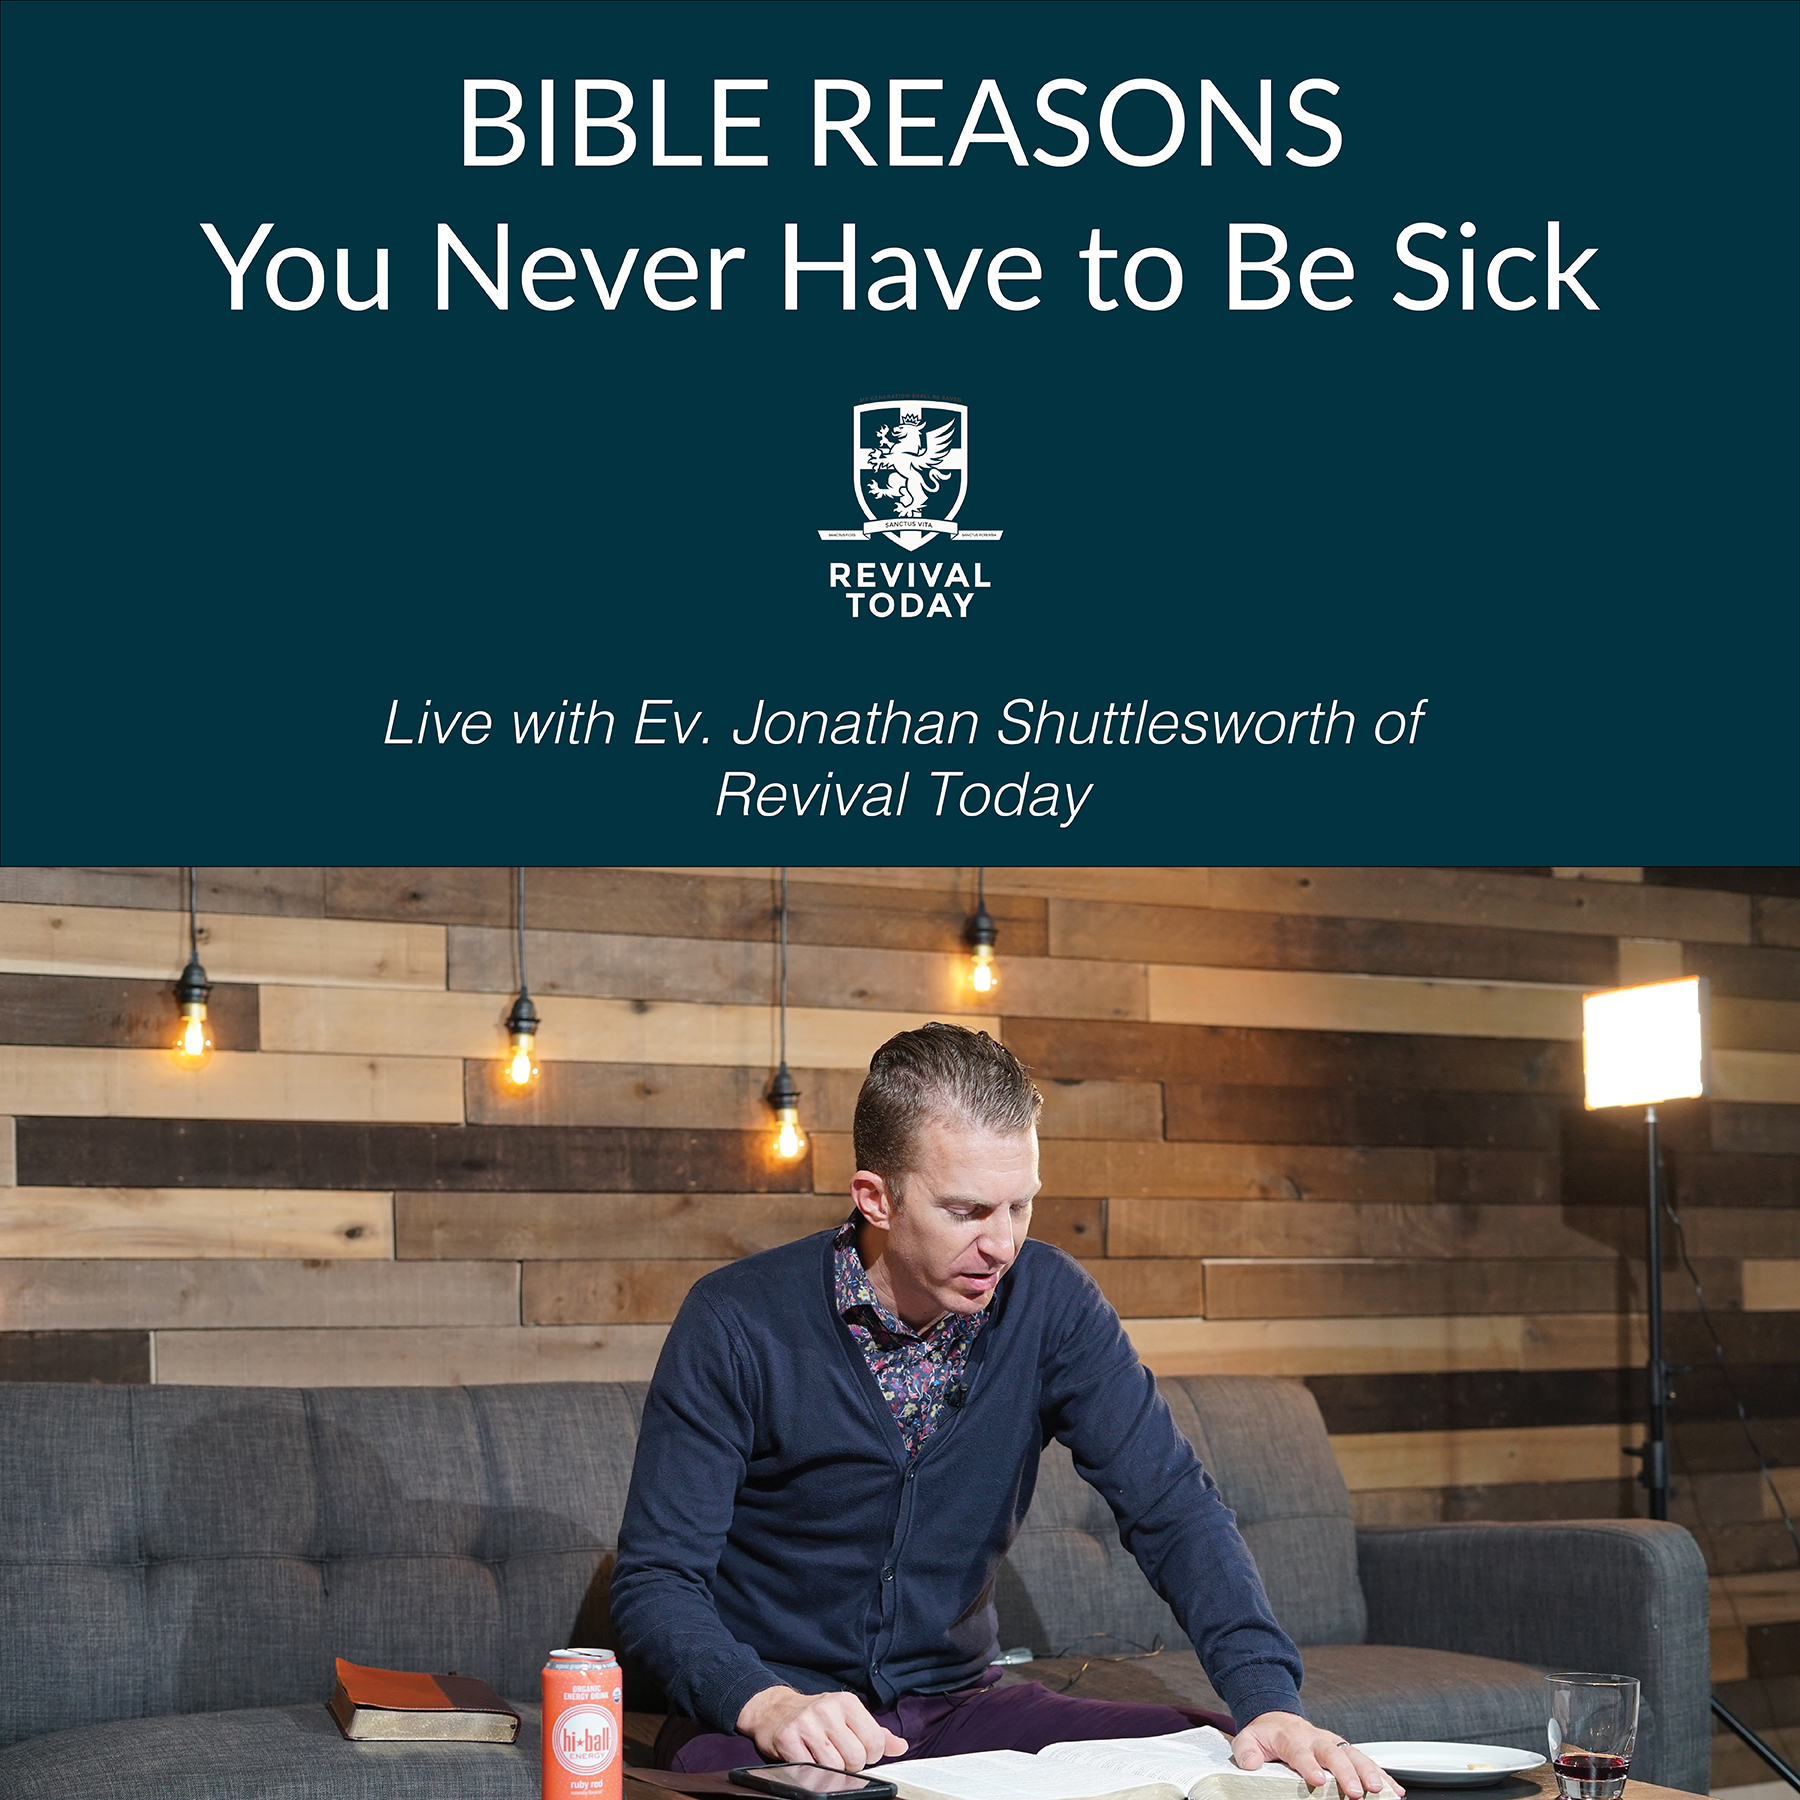 Bible Reasons You Never Have to Be Sick